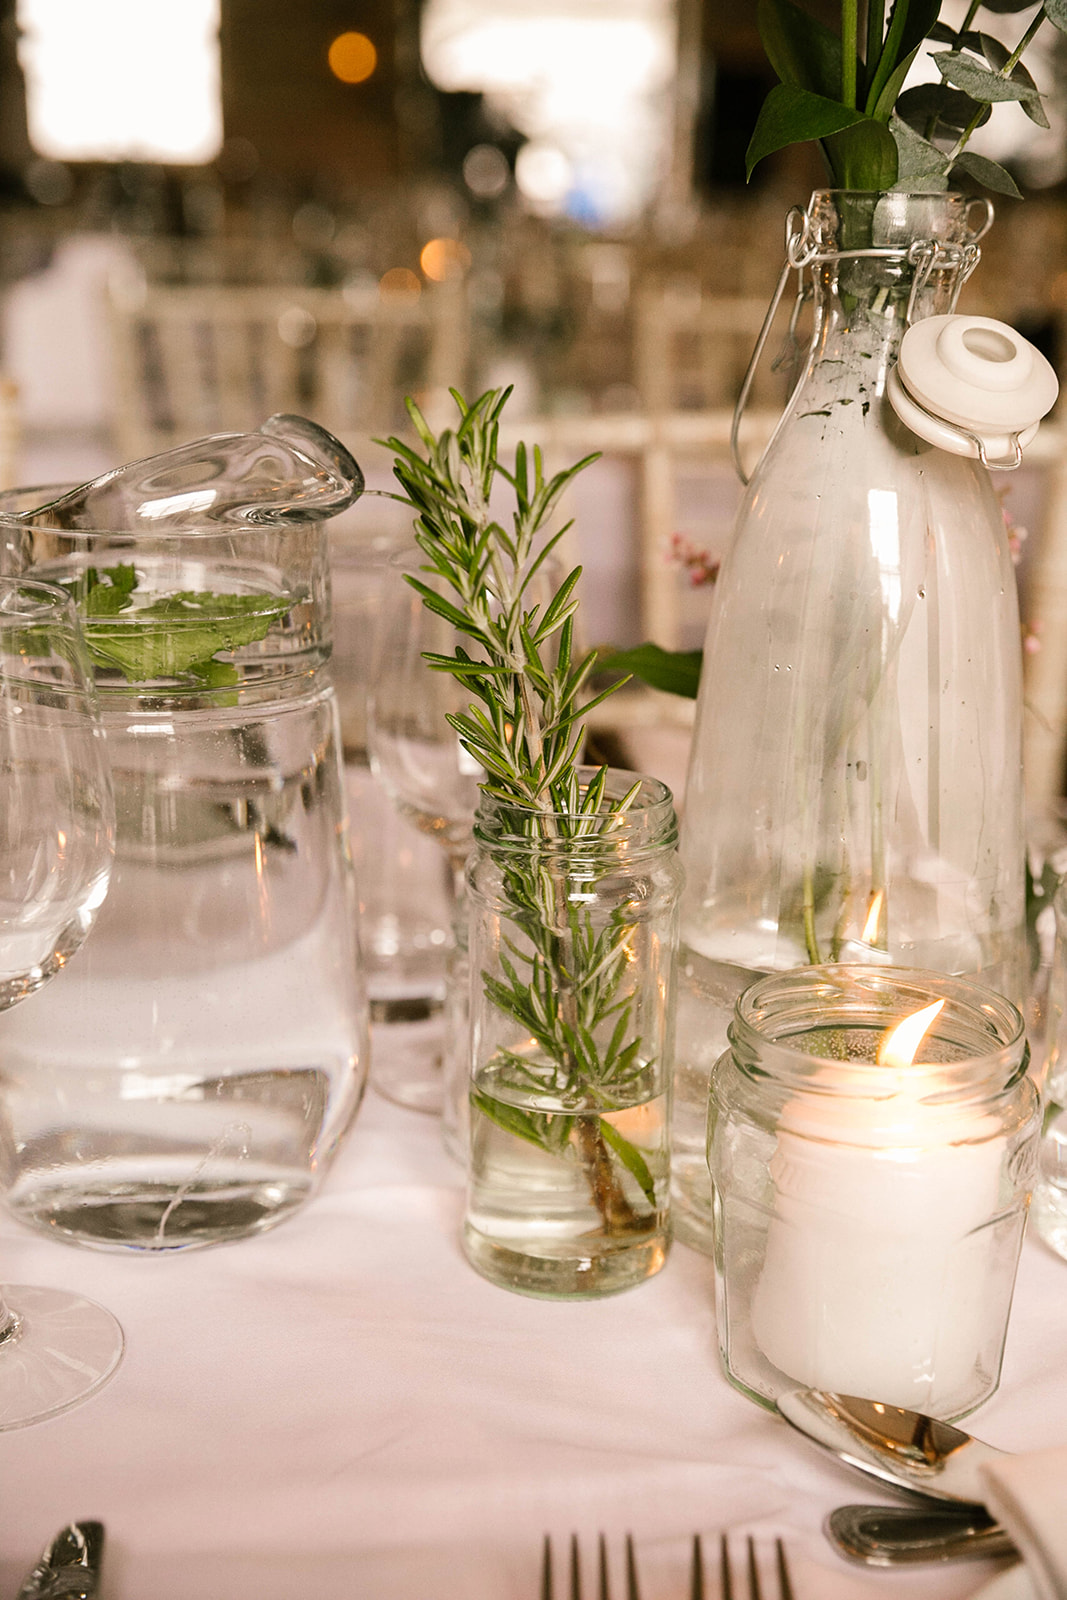 rosemary table decoration at wedding